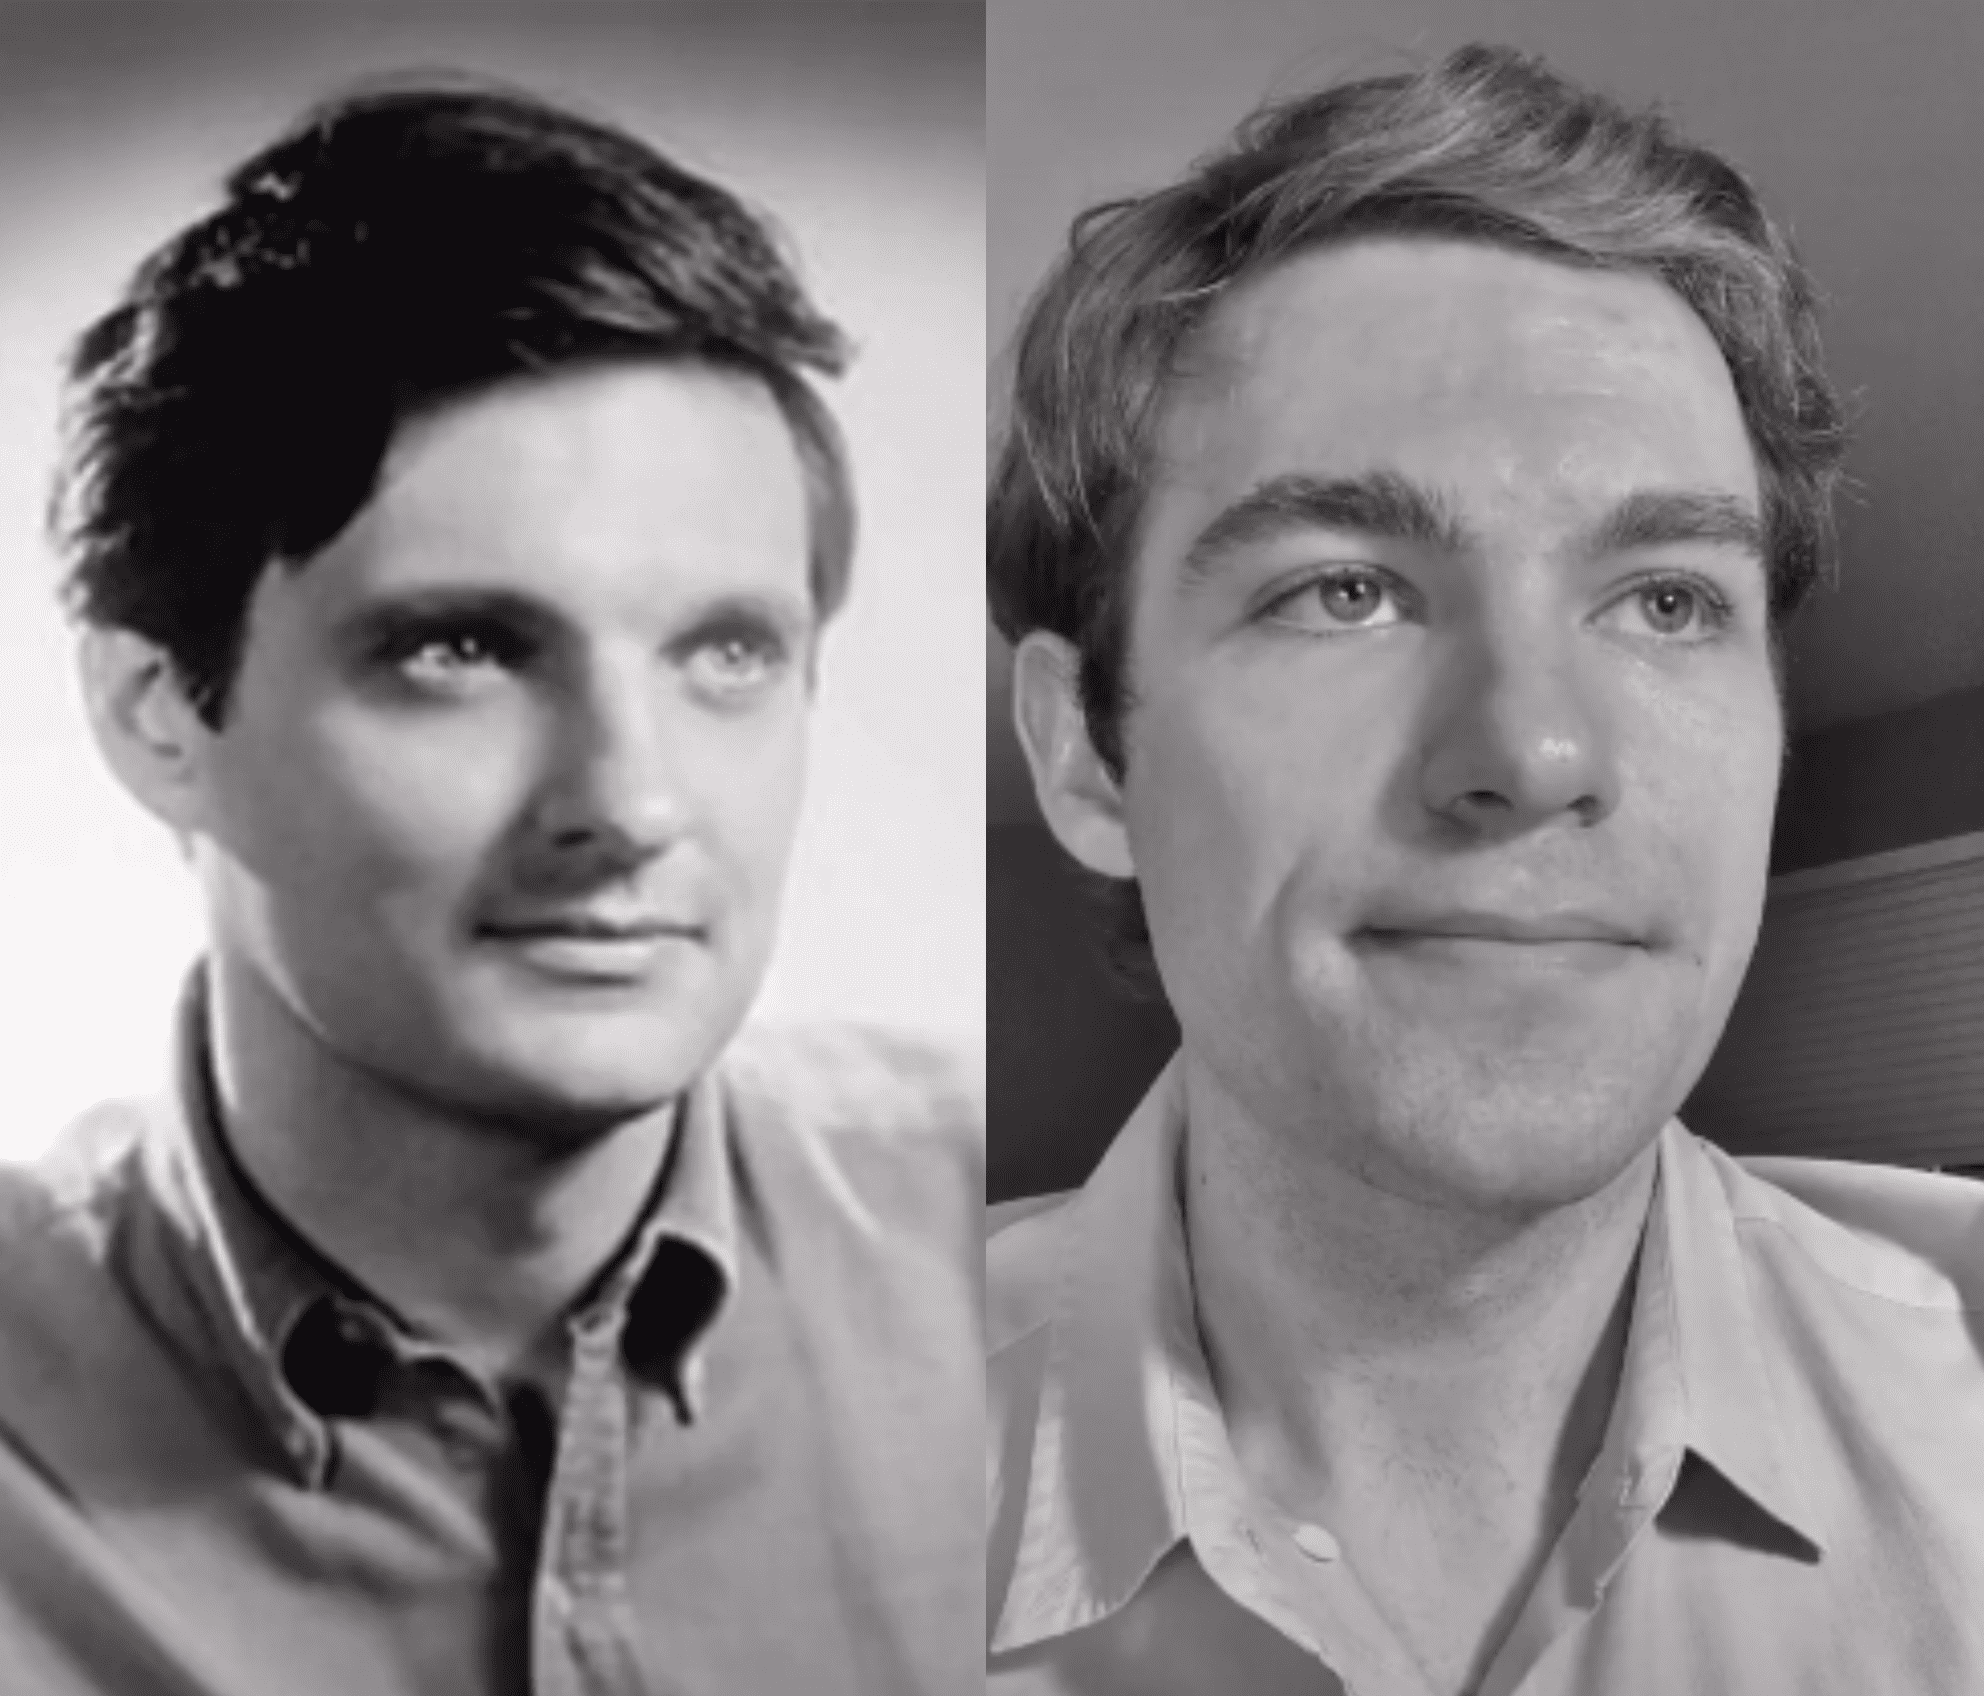 Collage showing a young Alan Alda and his grandson, Jake Alda, from Jake Alda's TikTok video from 2020 | Source: tiktok.com/@jakealdacoffey 